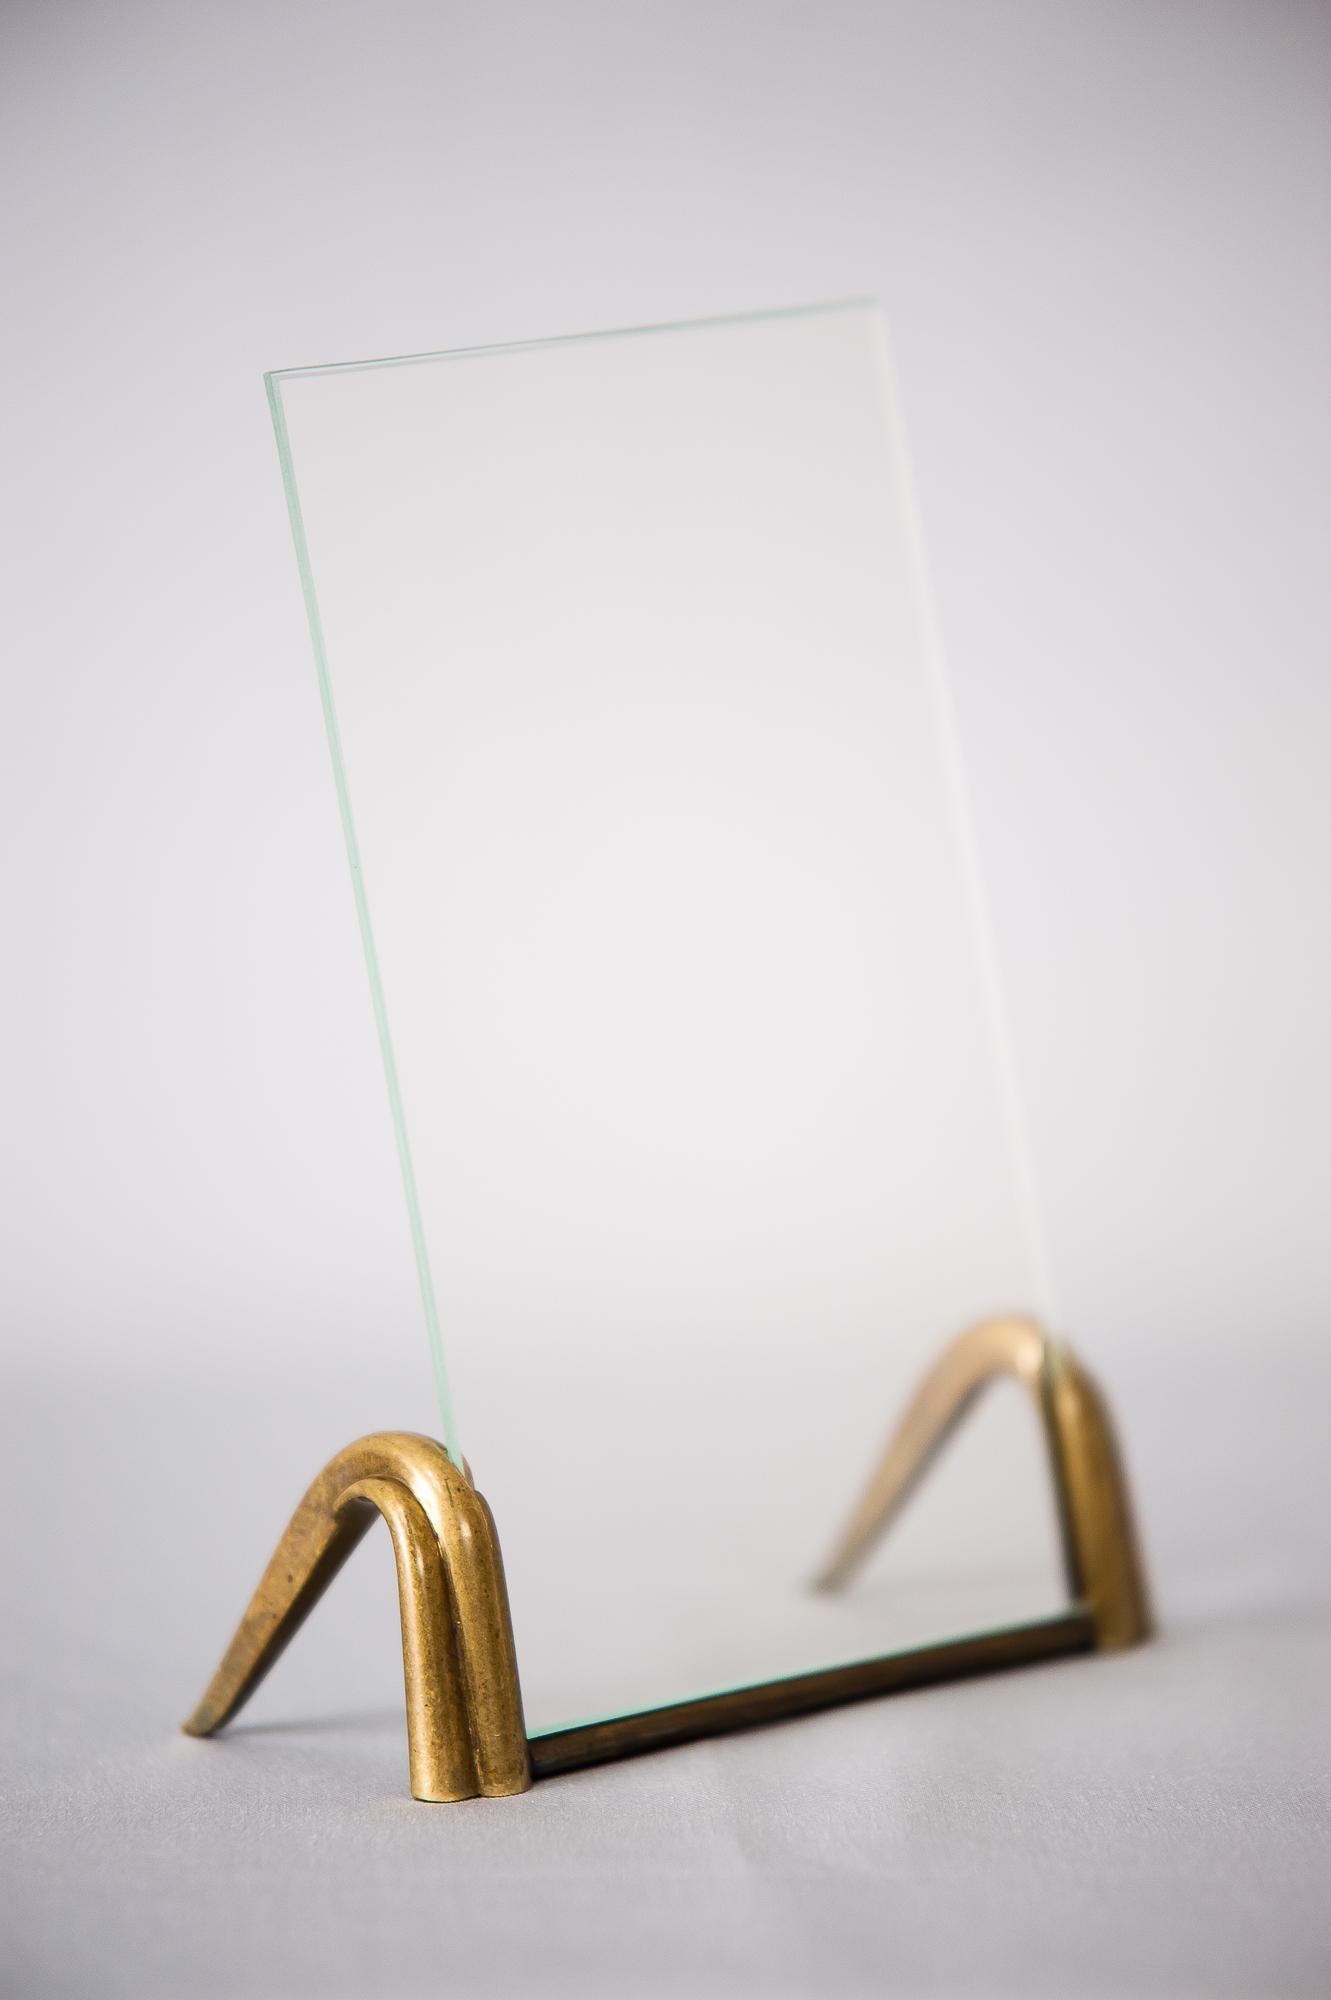 Richard Rohac picture frame ‘signed’
Brass original condition.